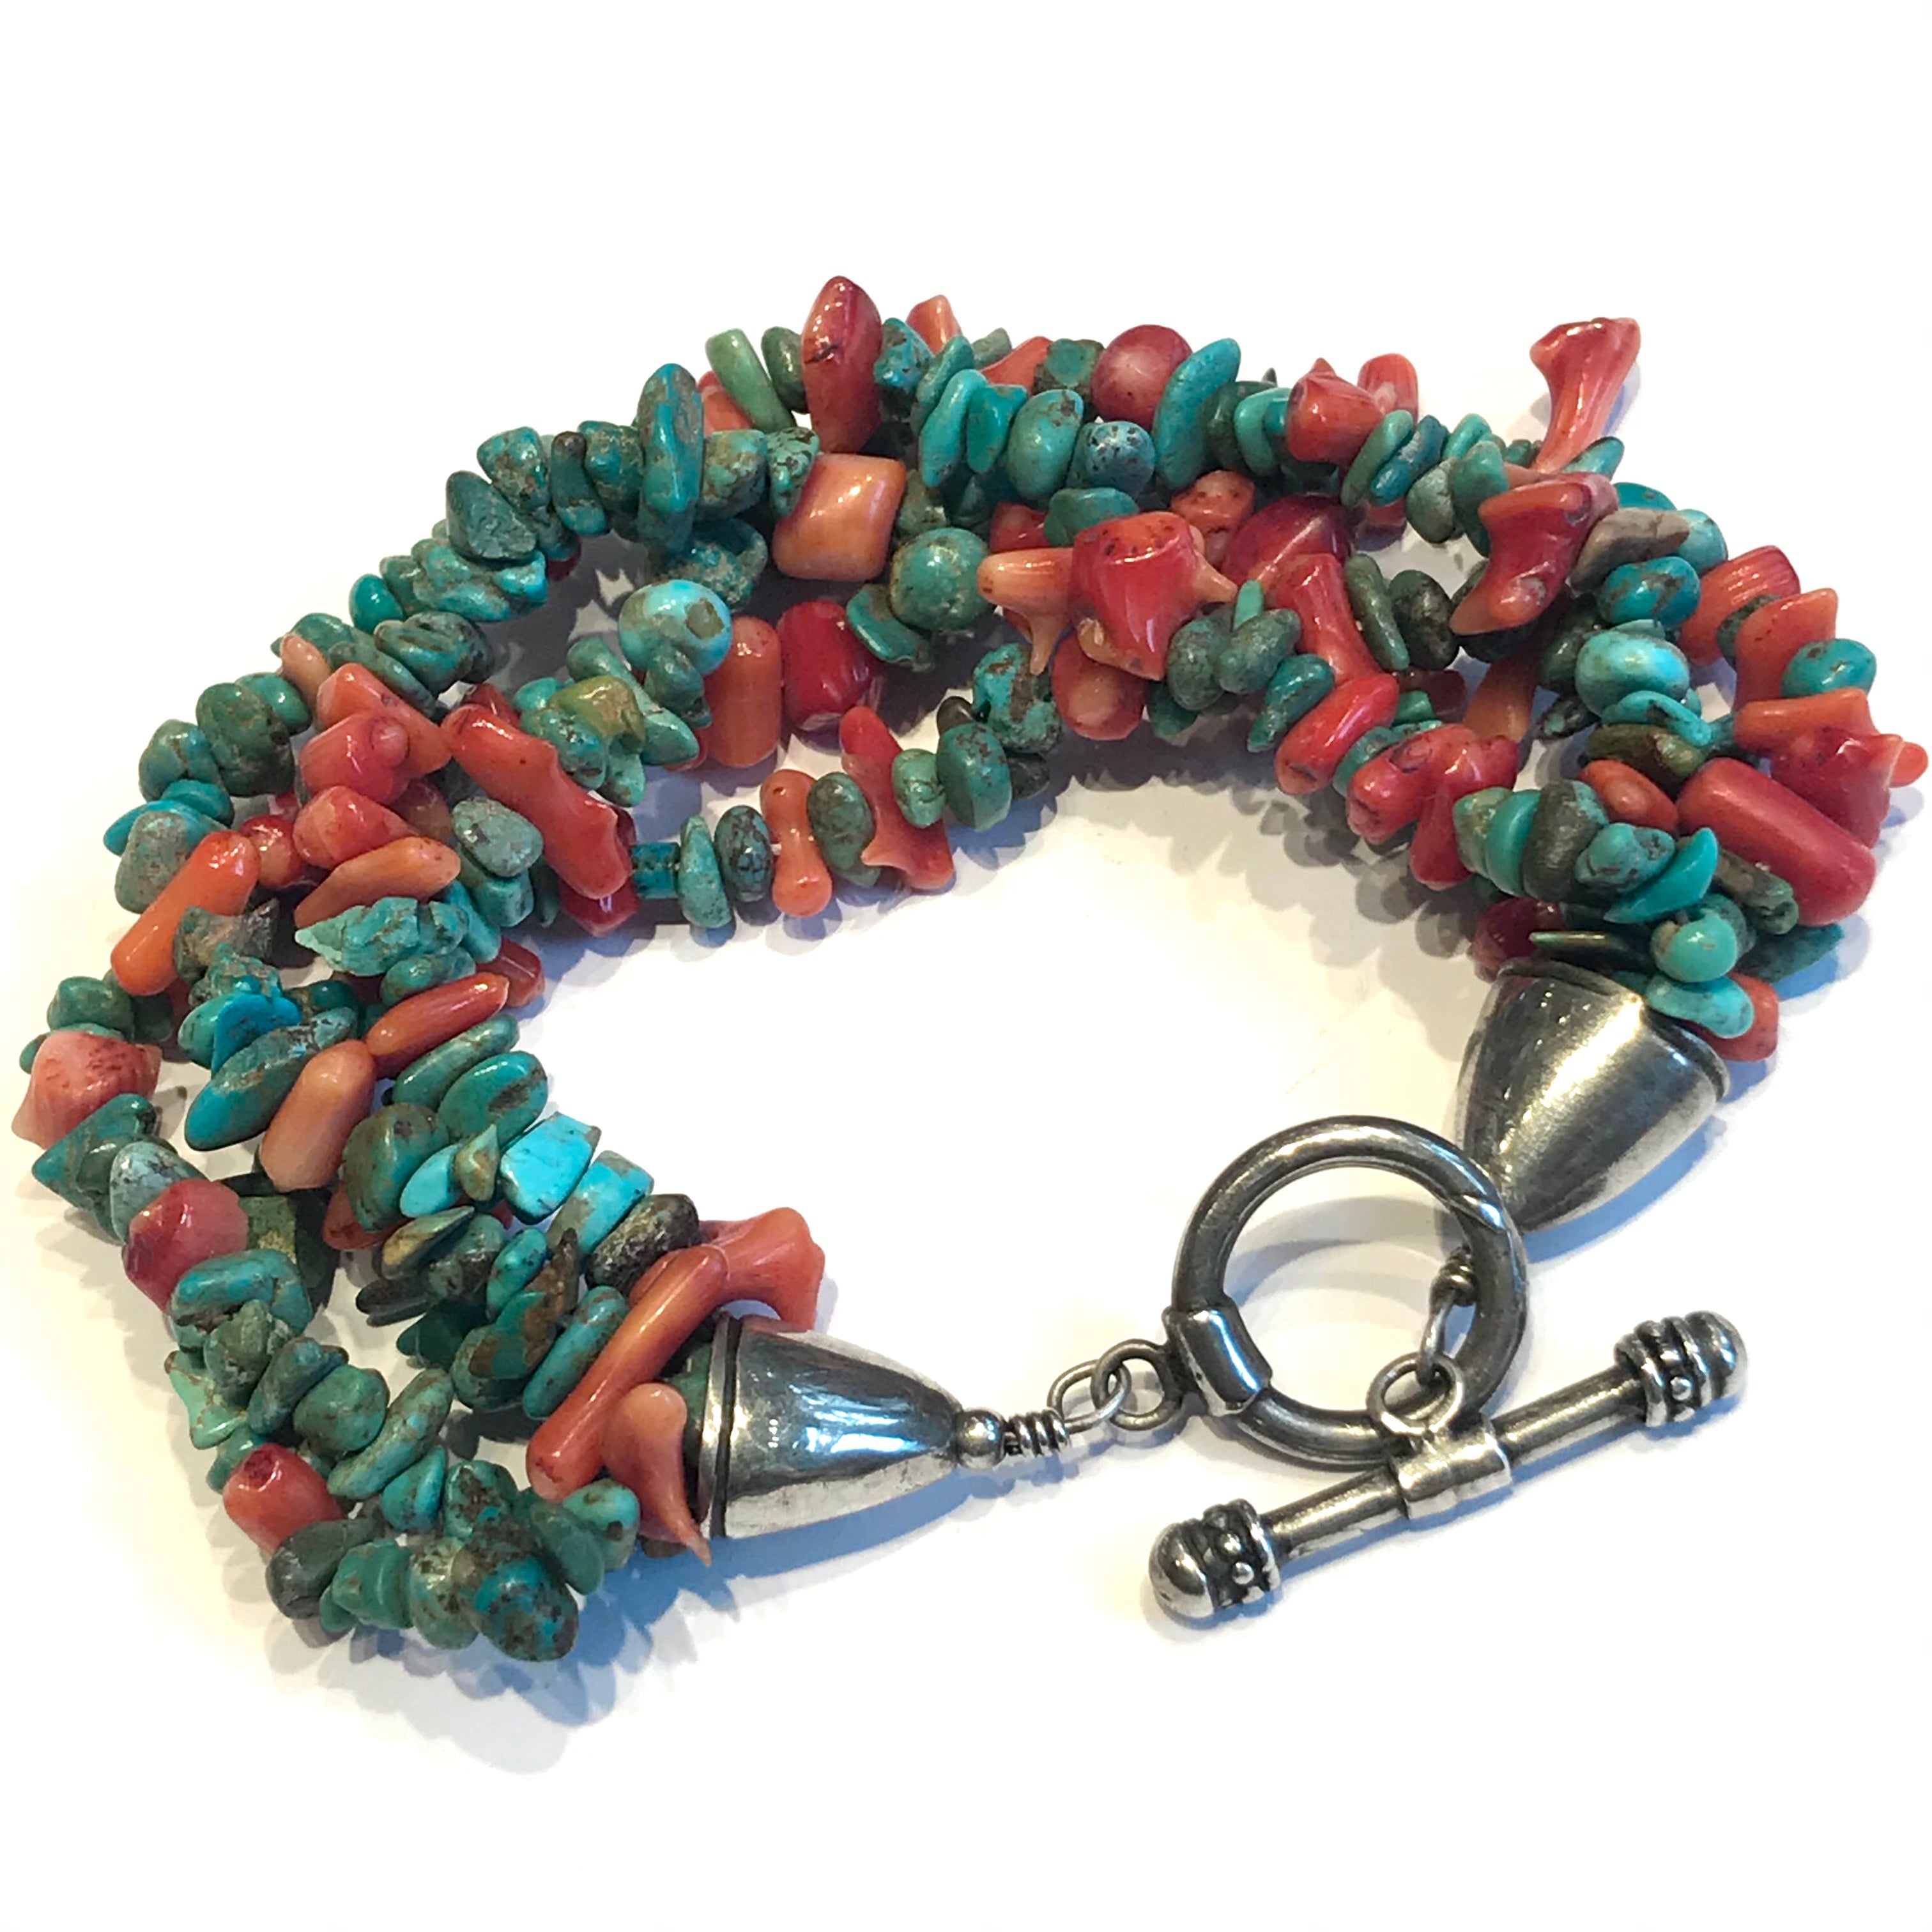 Multi row turquoise and spiny bracelet